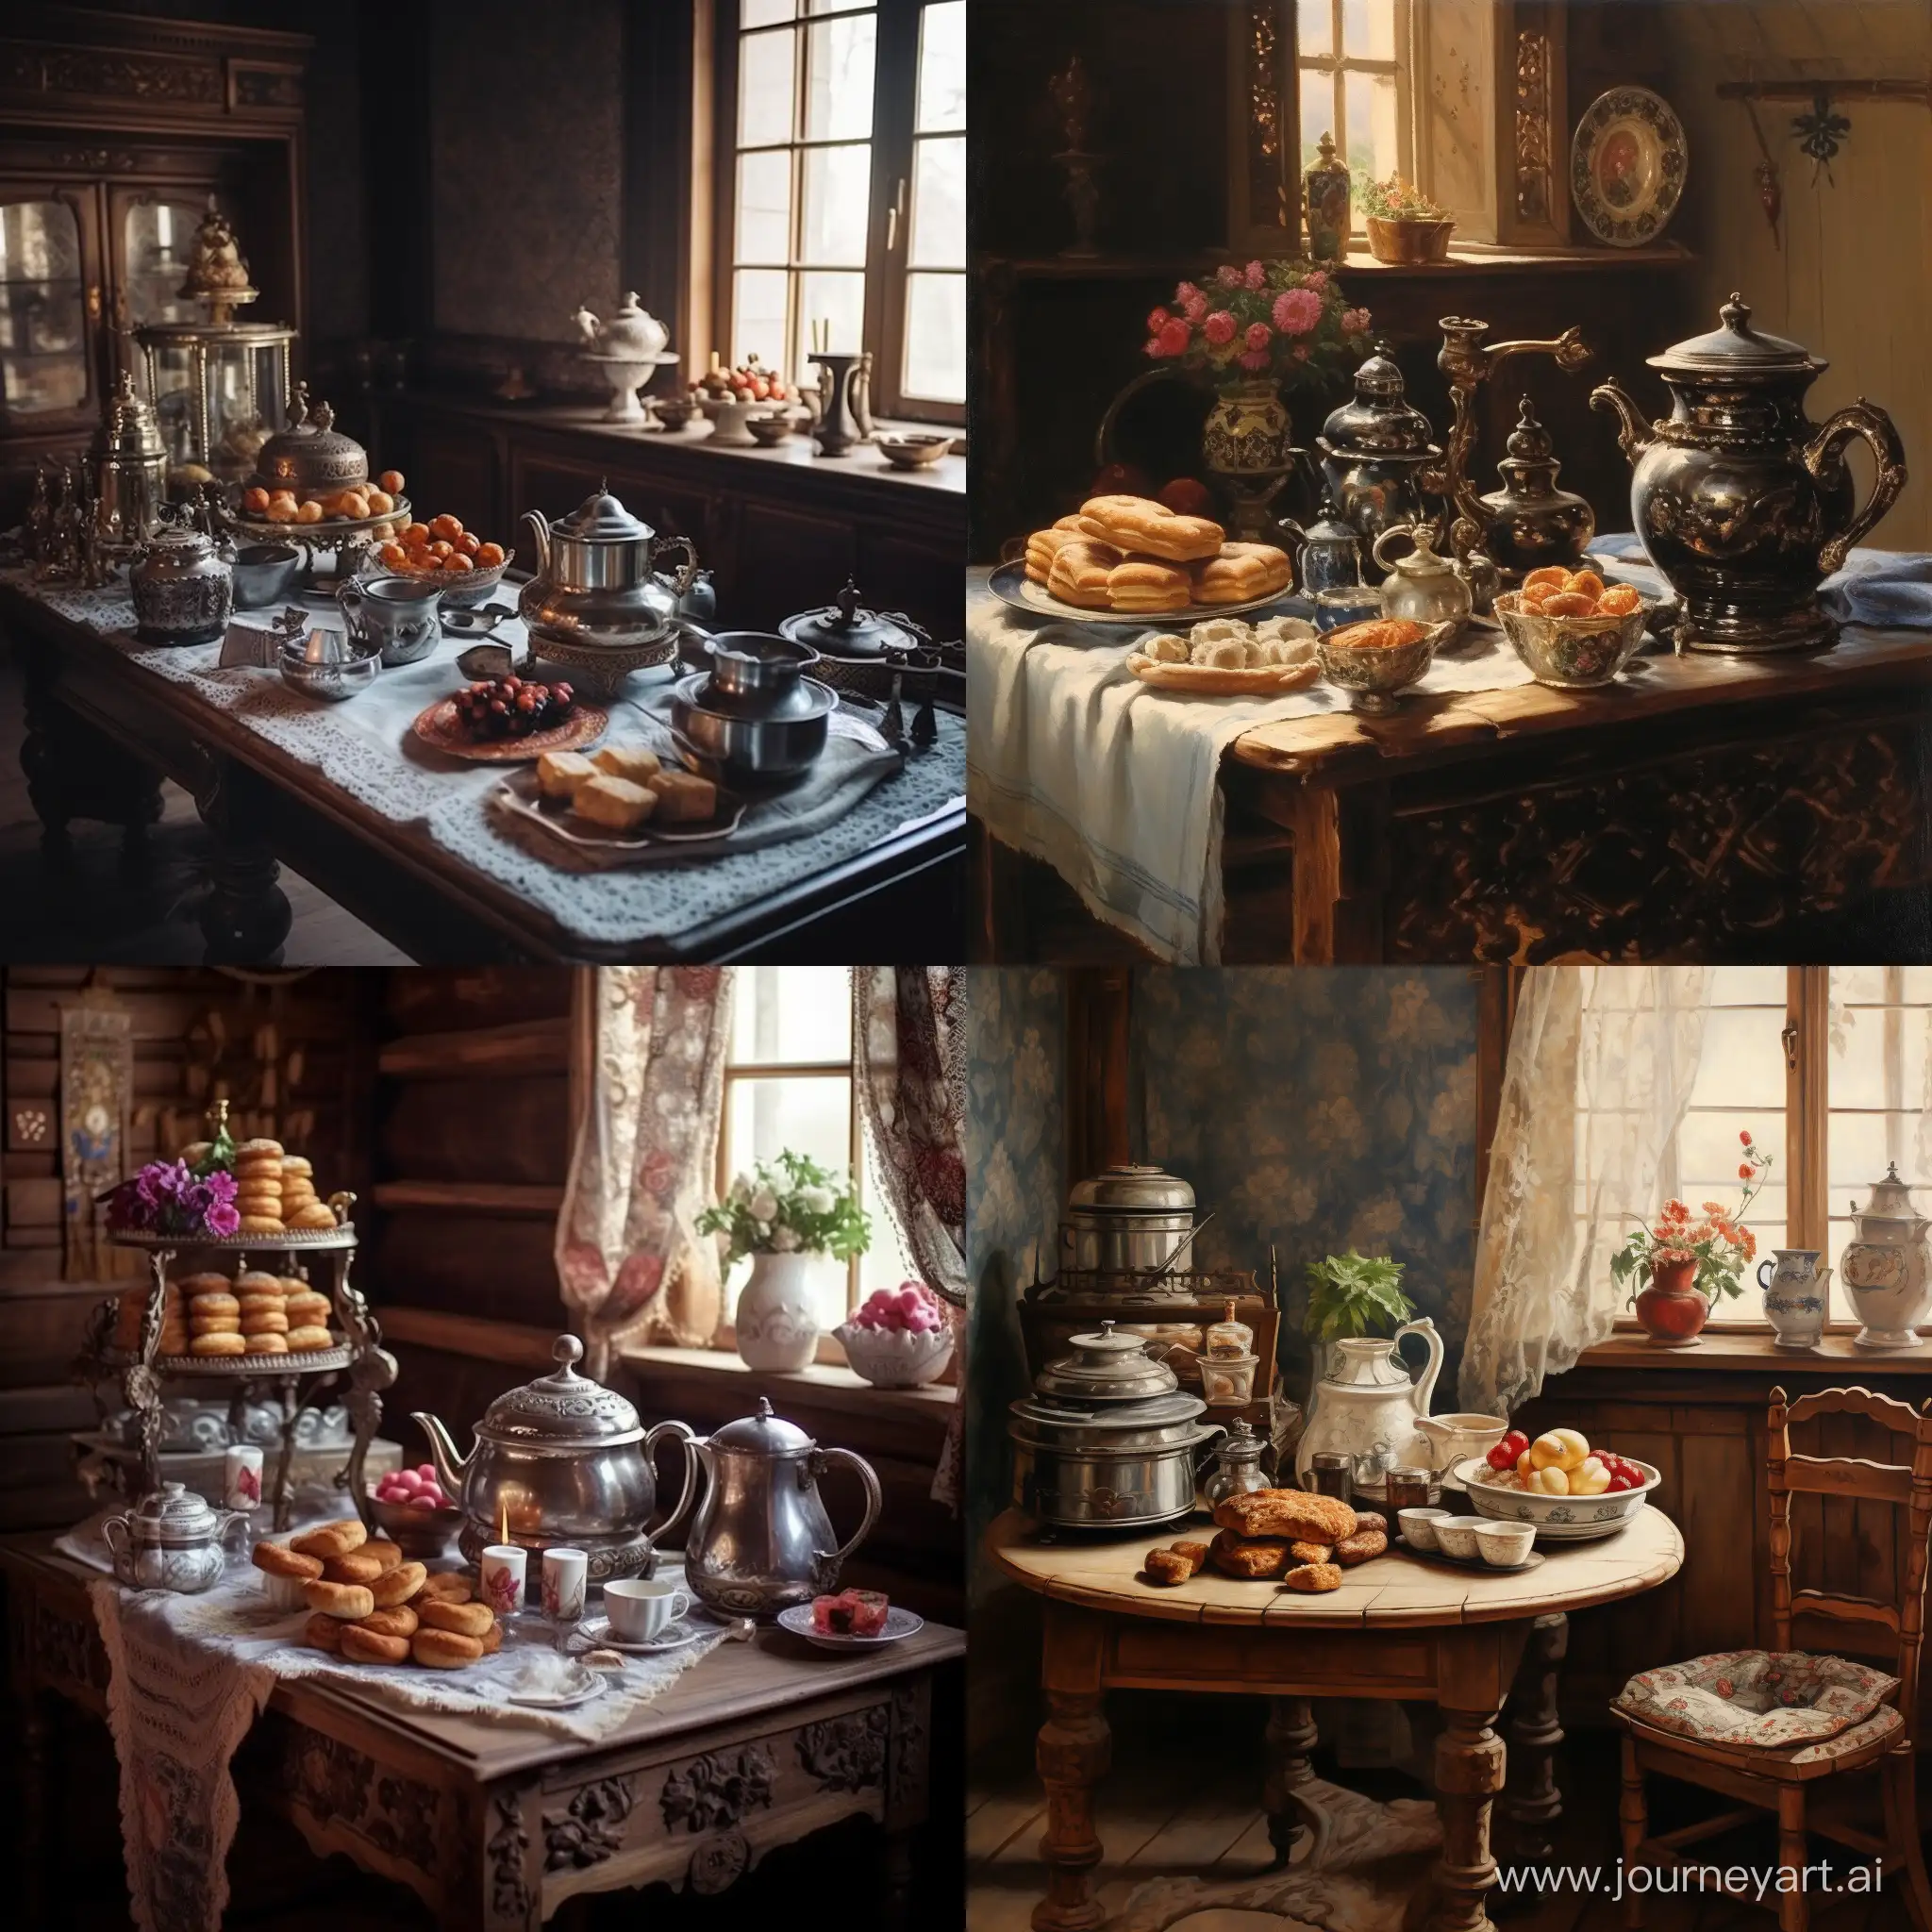 Traditional-Russian-Tea-Time-Samovar-and-Pastries-in-a-Cozy-Room